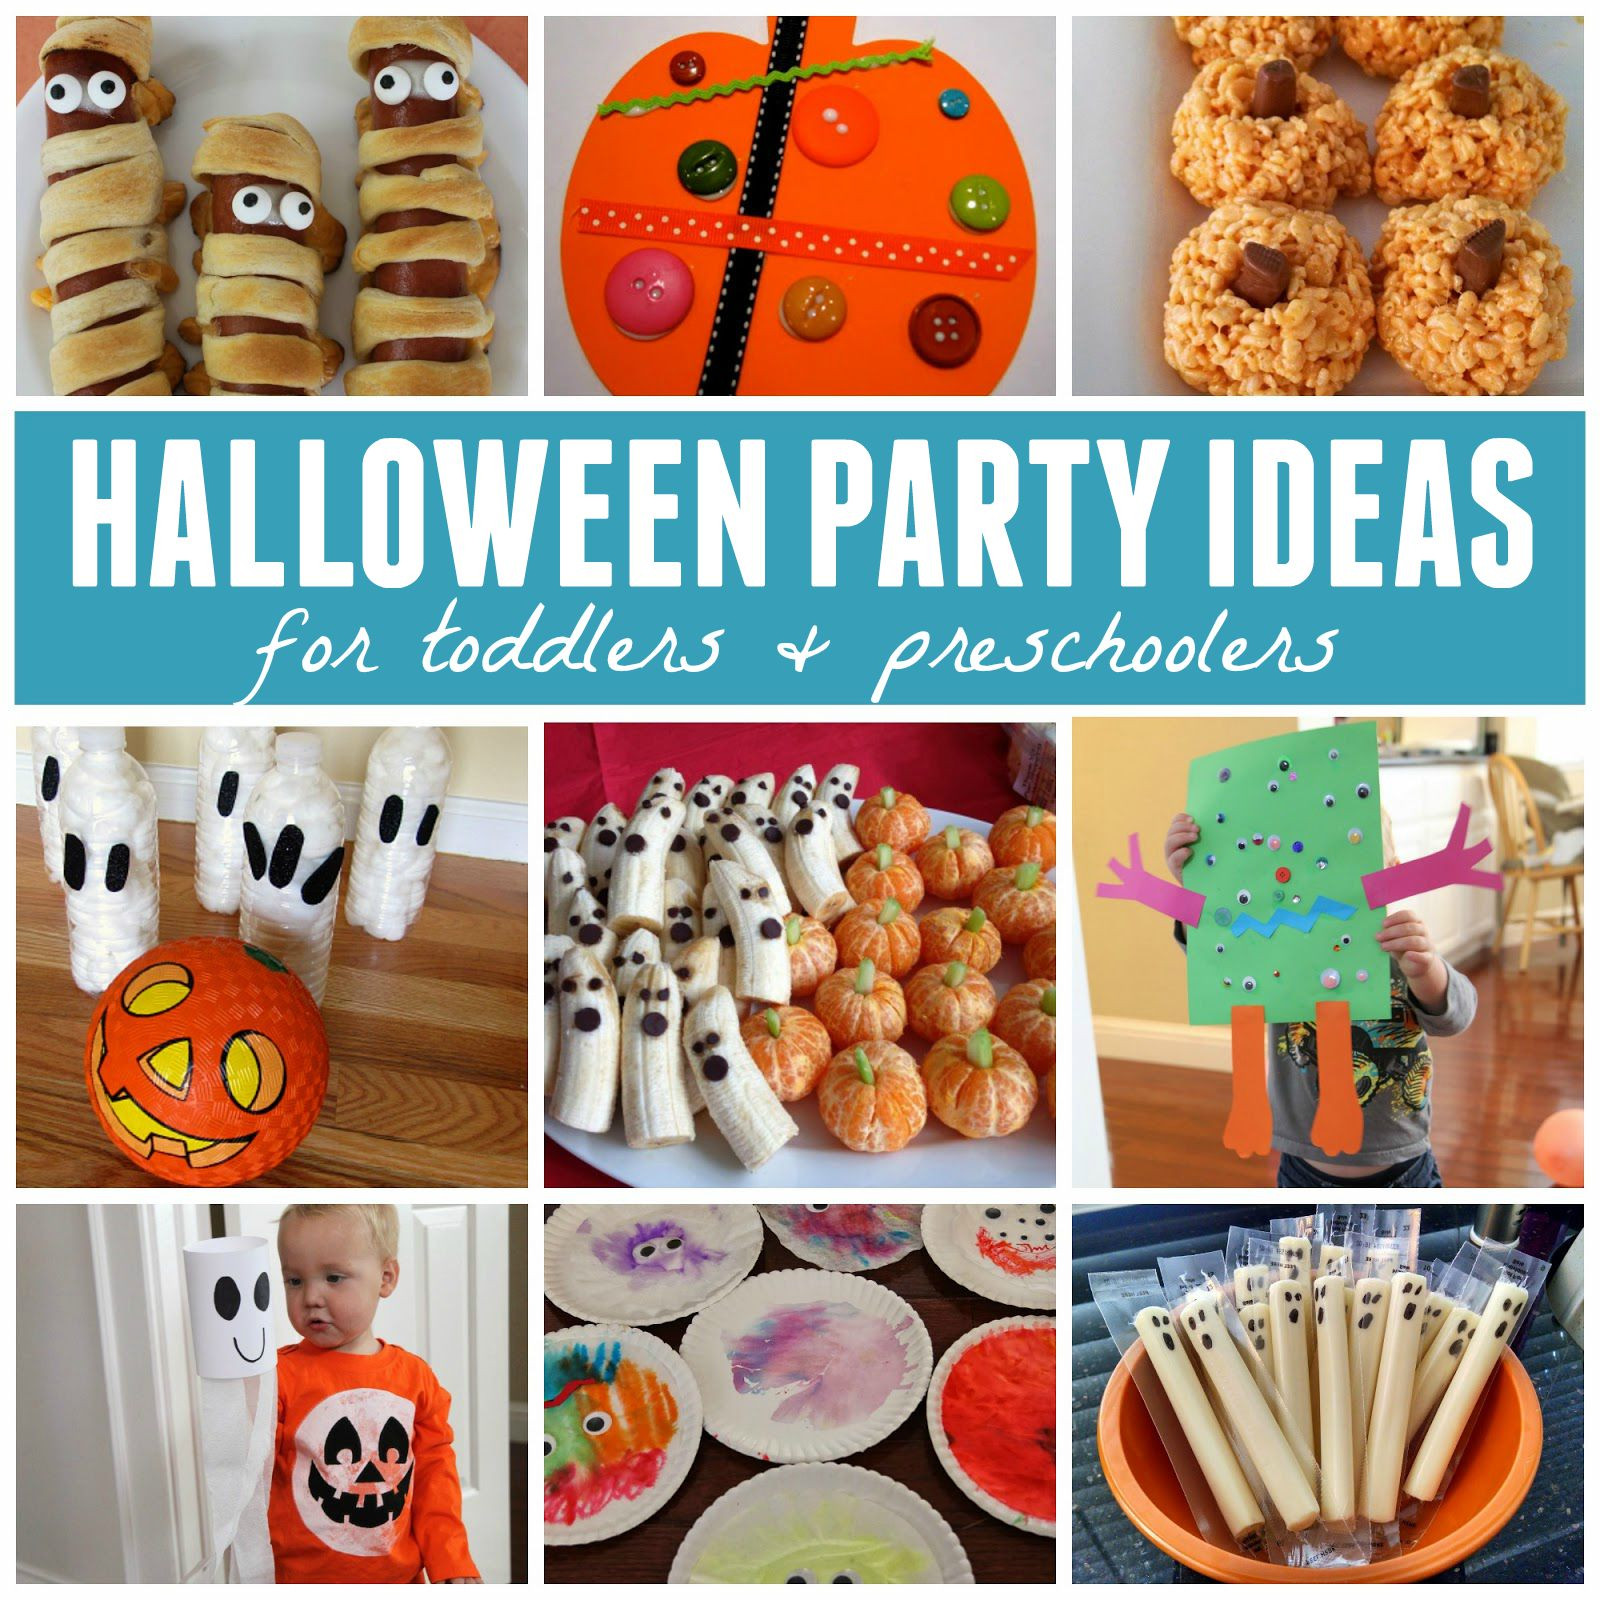 Halloween Party Ideas For Teenagers
 Toddler Approved Last Minute Halloween Party Ideas